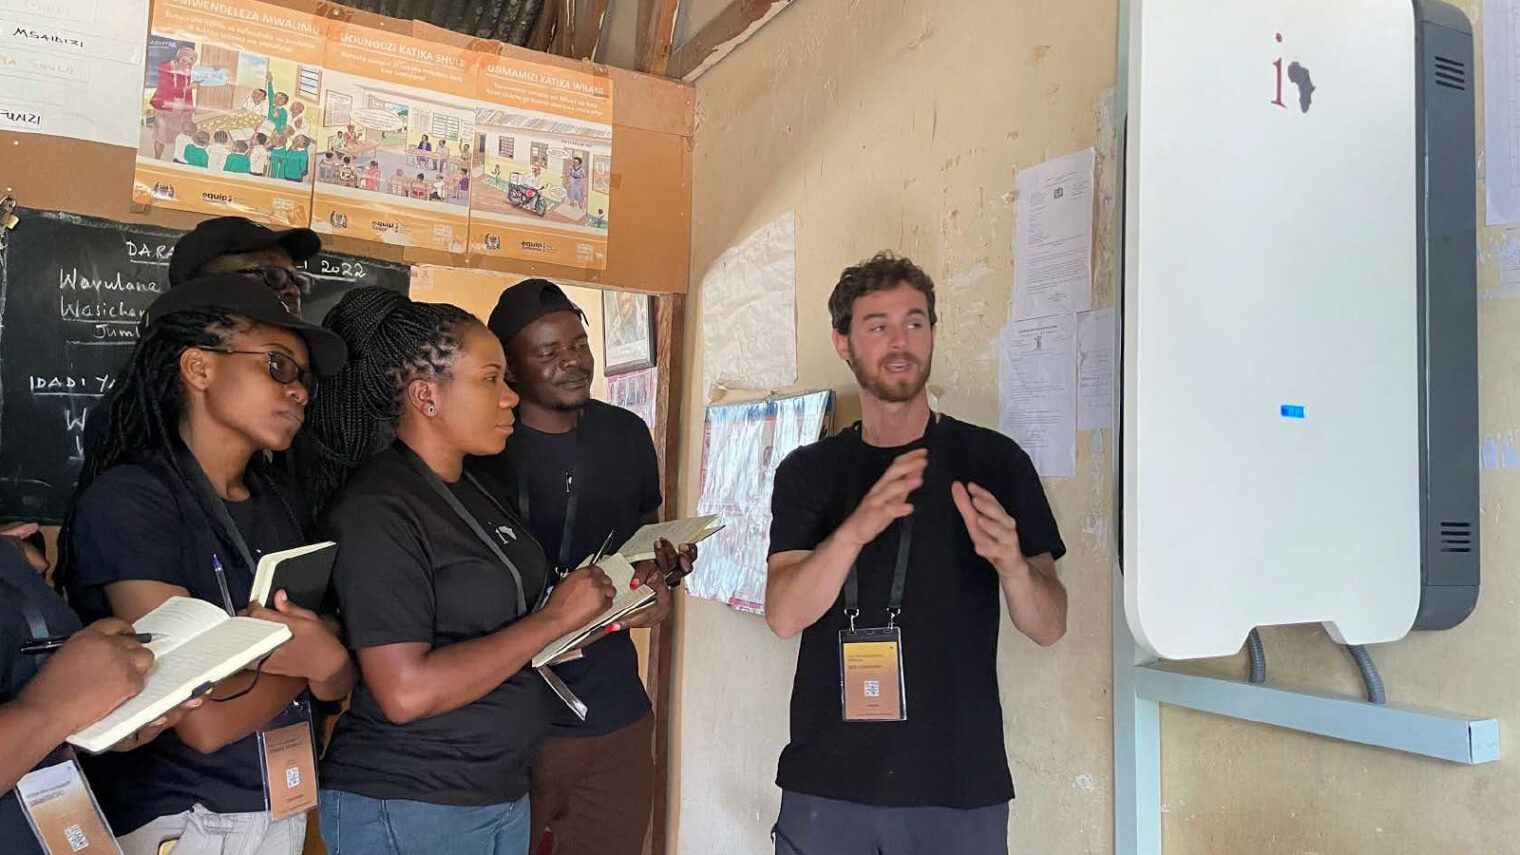 Electromechanical engineer Ben Fuxbrunner explaining his project in Tanzania to local students. Photo courtesy of Innovation: Africa